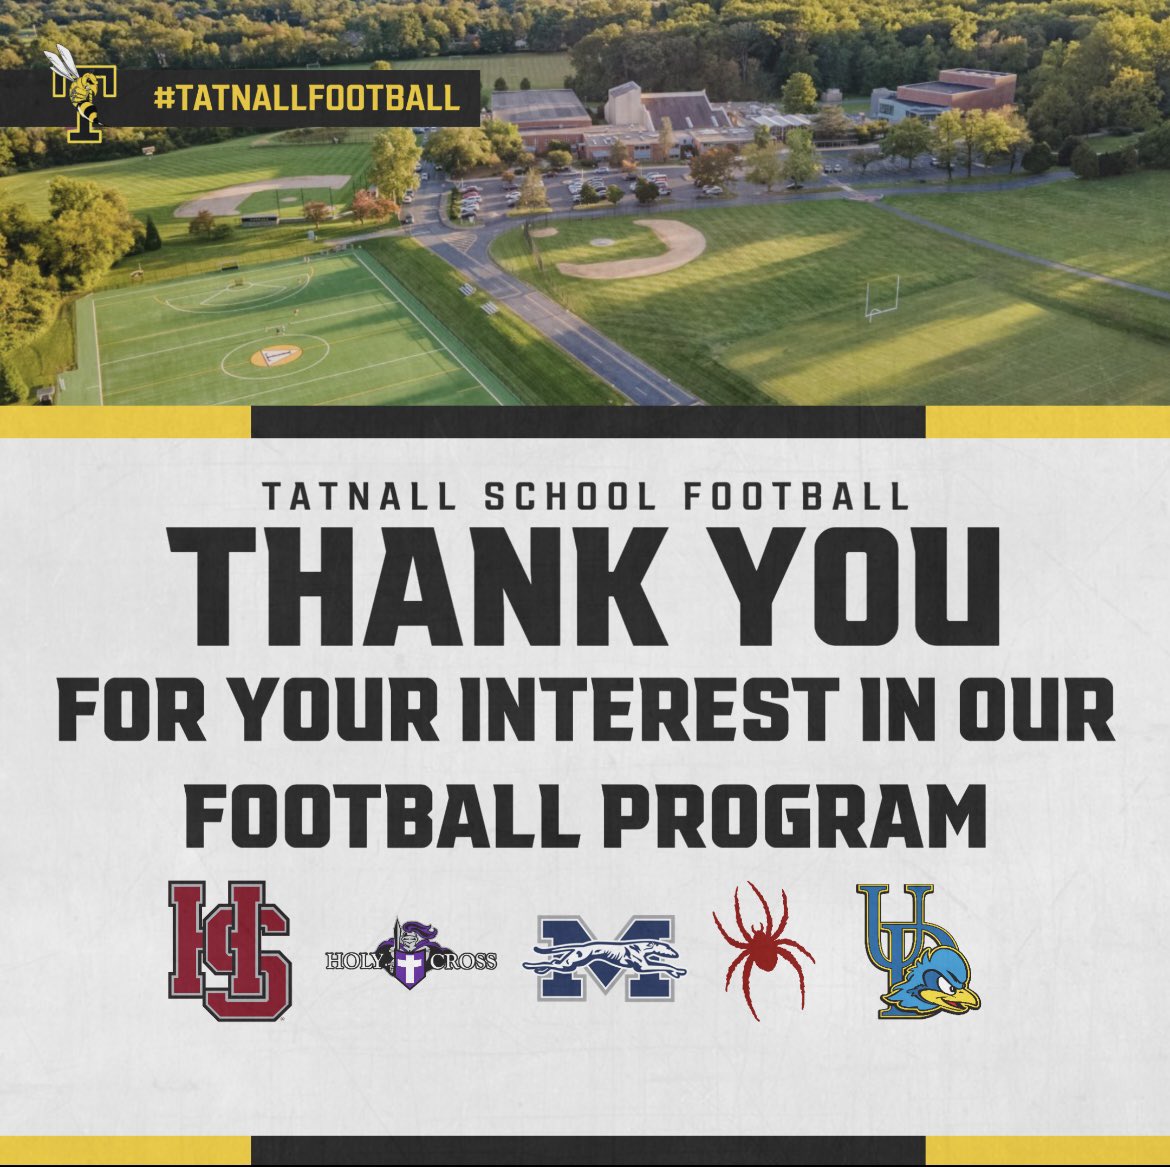 Thank You to those schools reaching out about our program! Excited to get more colleges inside our building and providing our student-athletes with opportunities at the next level! @tatnallfootball #FTG #dehsfootball #tatnallathletics #programbuilding